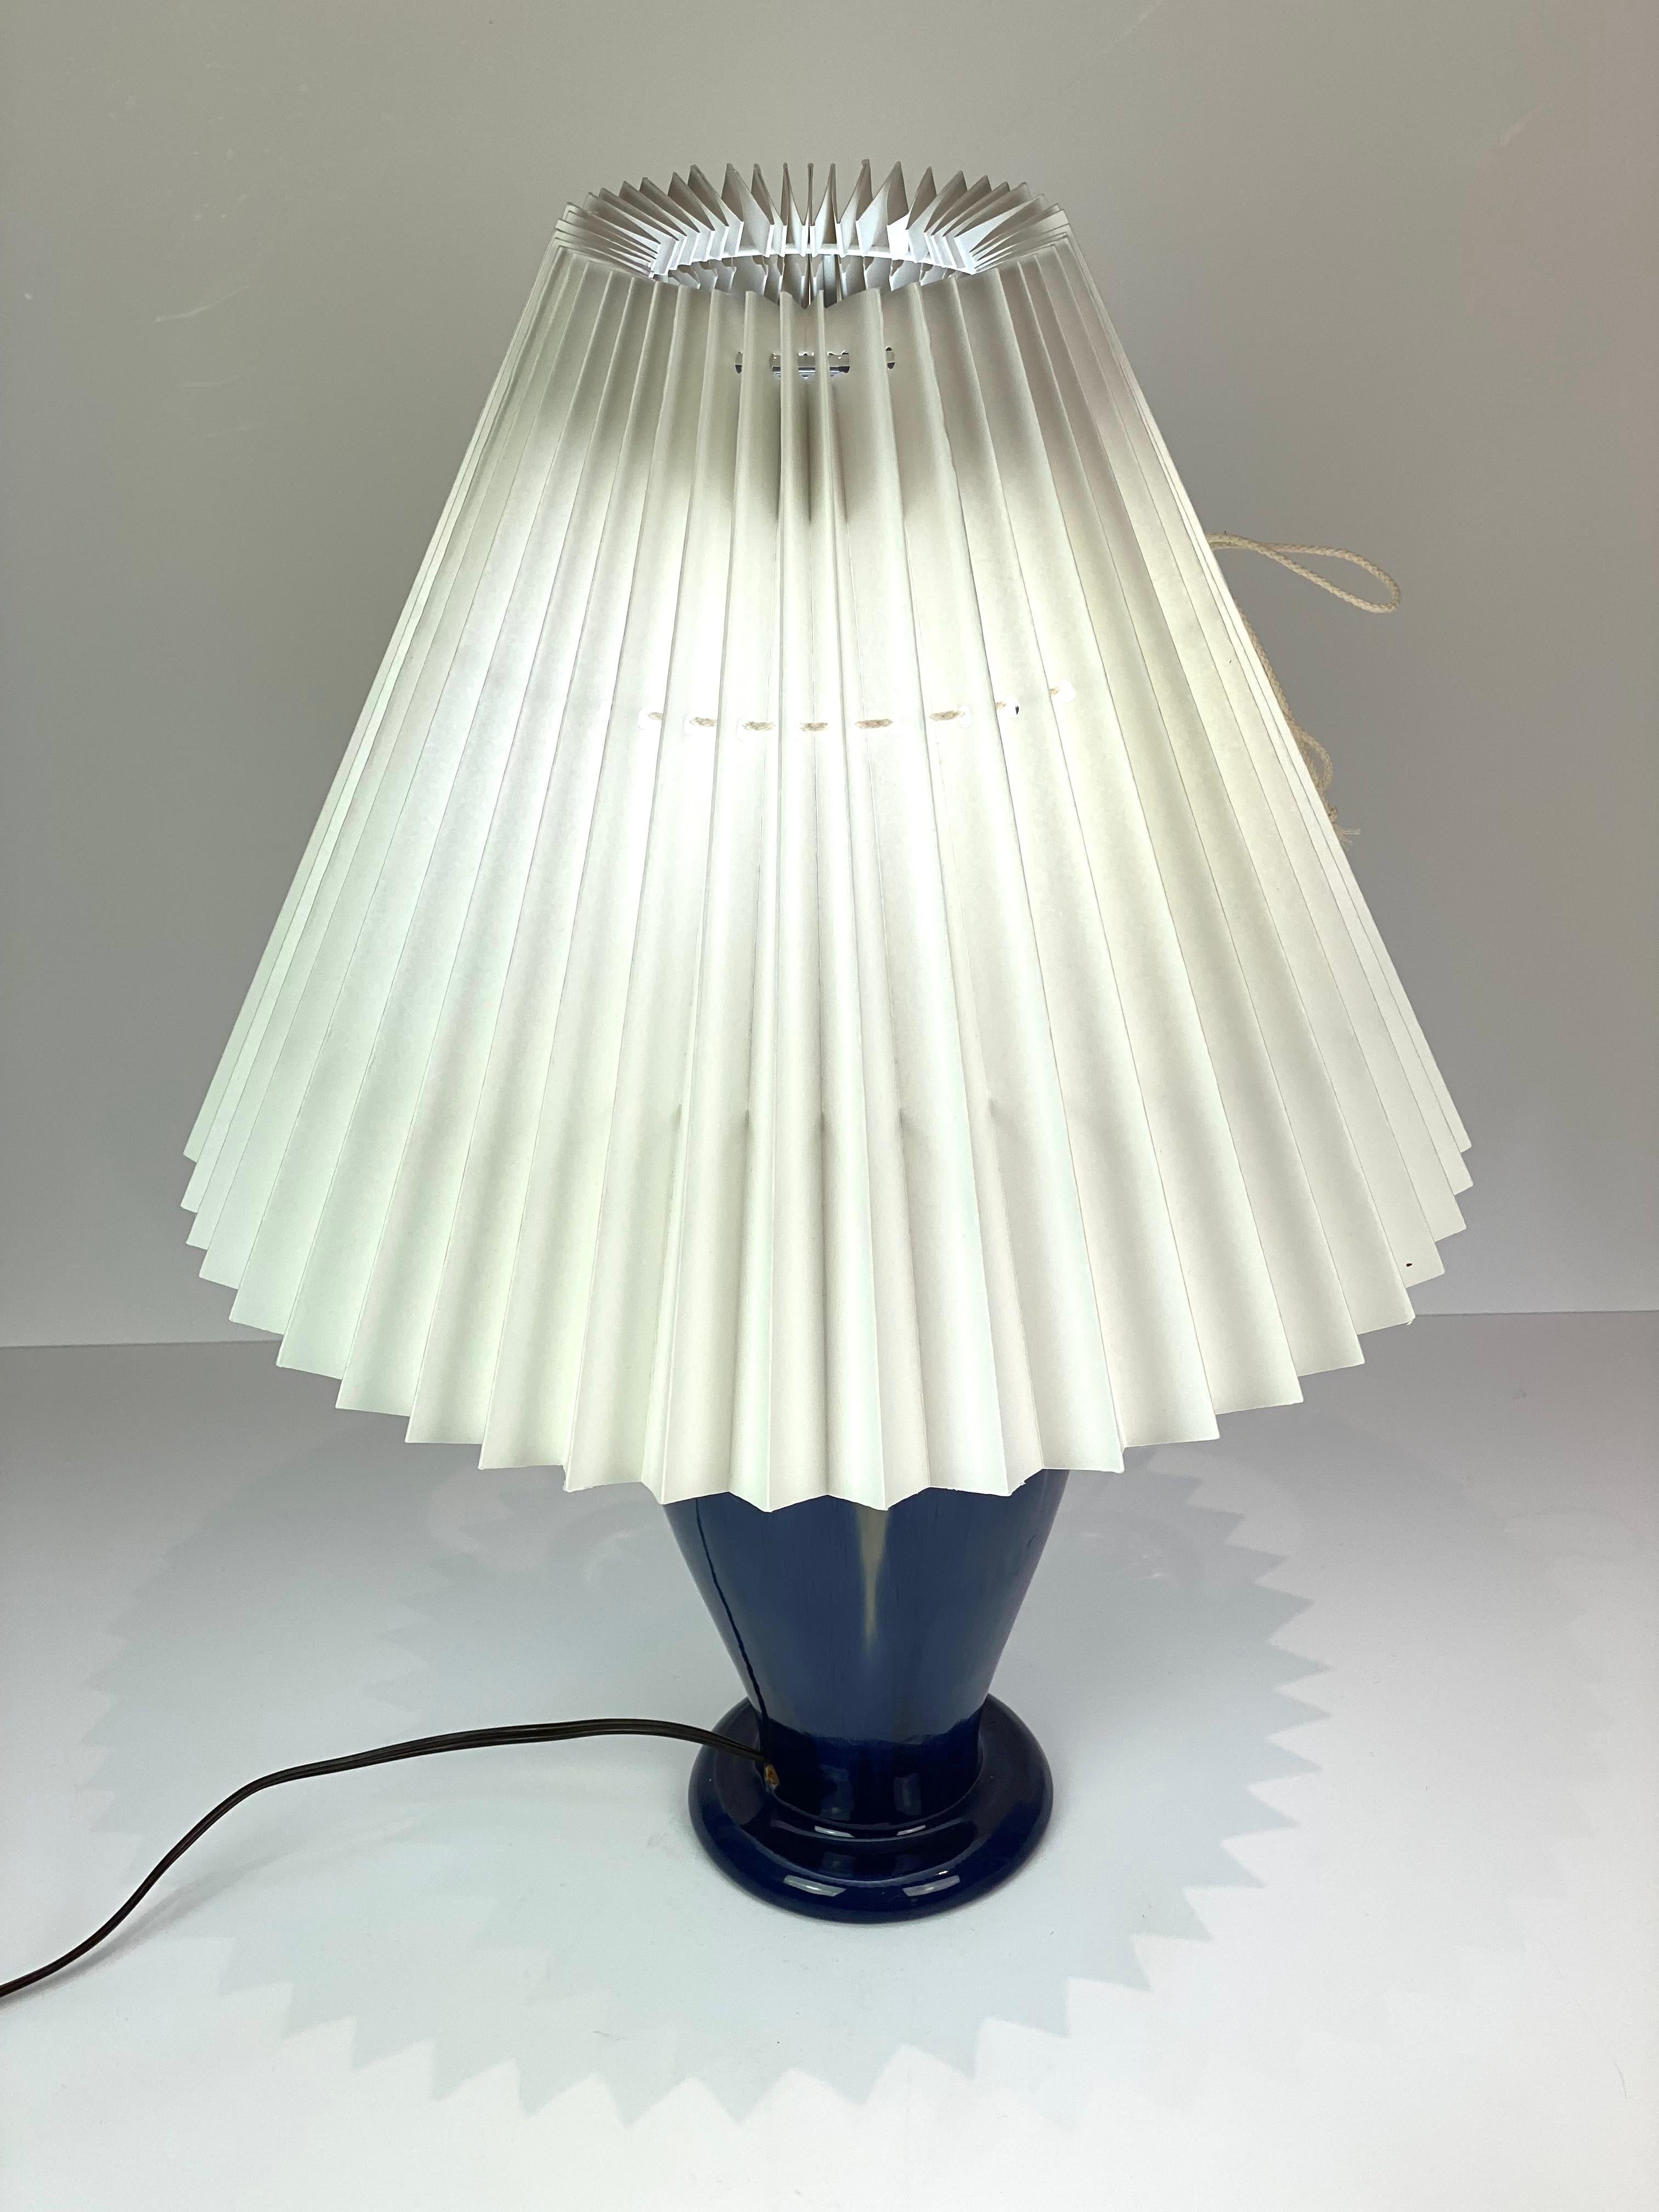 Mid-20th Century Ceramic Table Lamp with Blue Glaze and Paper Shade, by Michael Andersen